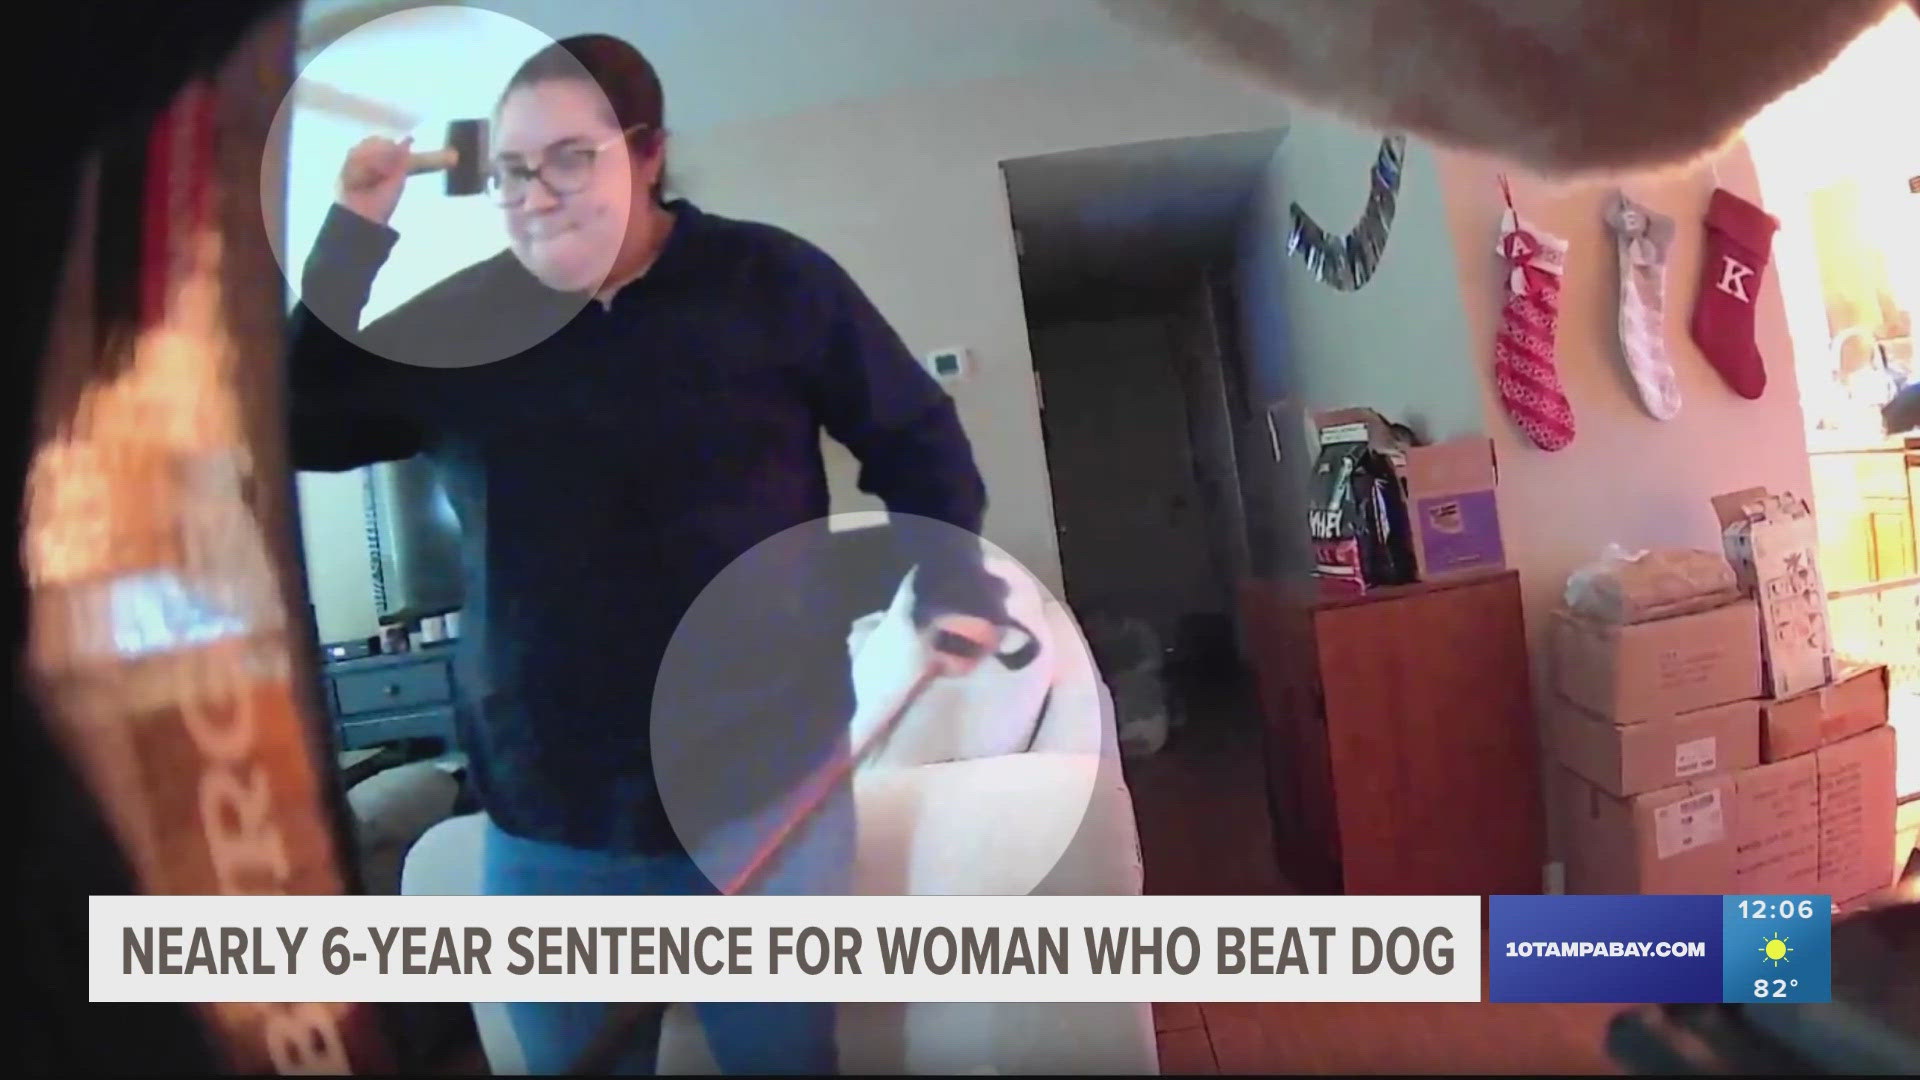 The woman was caught on camera hitting the dog repeatedly with a rubber mallet, including on the head.